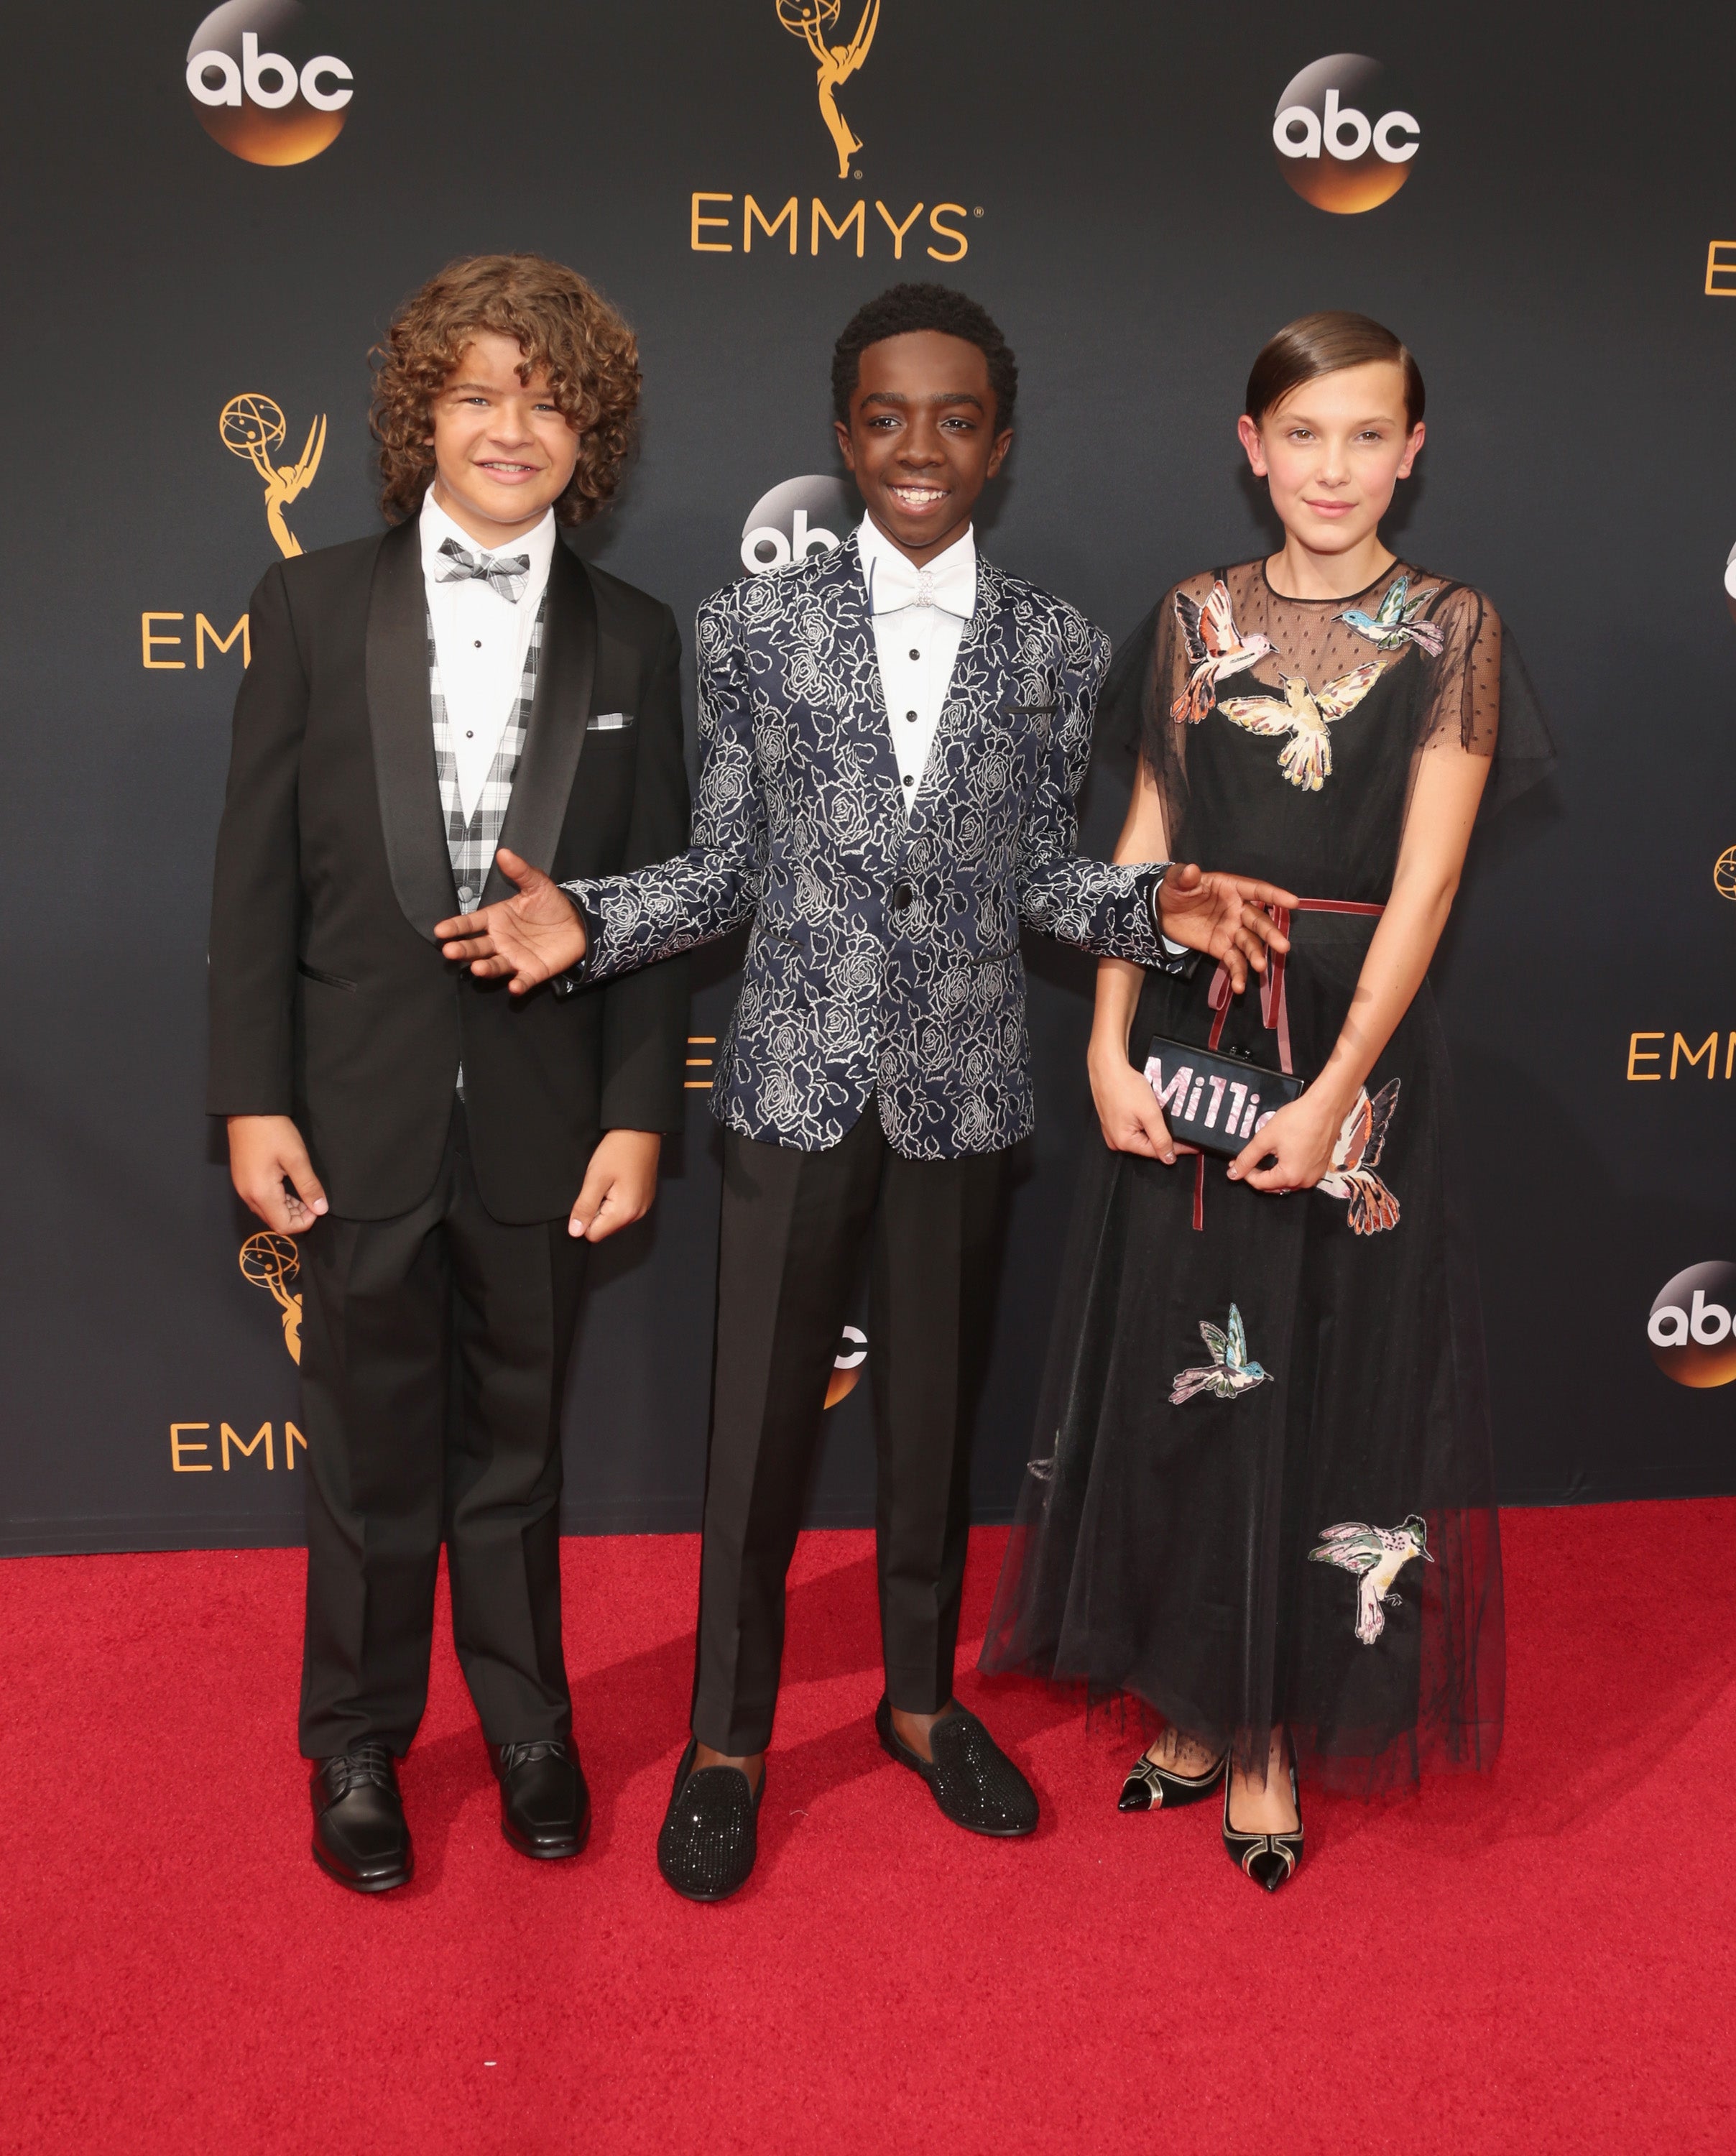 The 2016 Emmys Red Carpet is On Another Level
